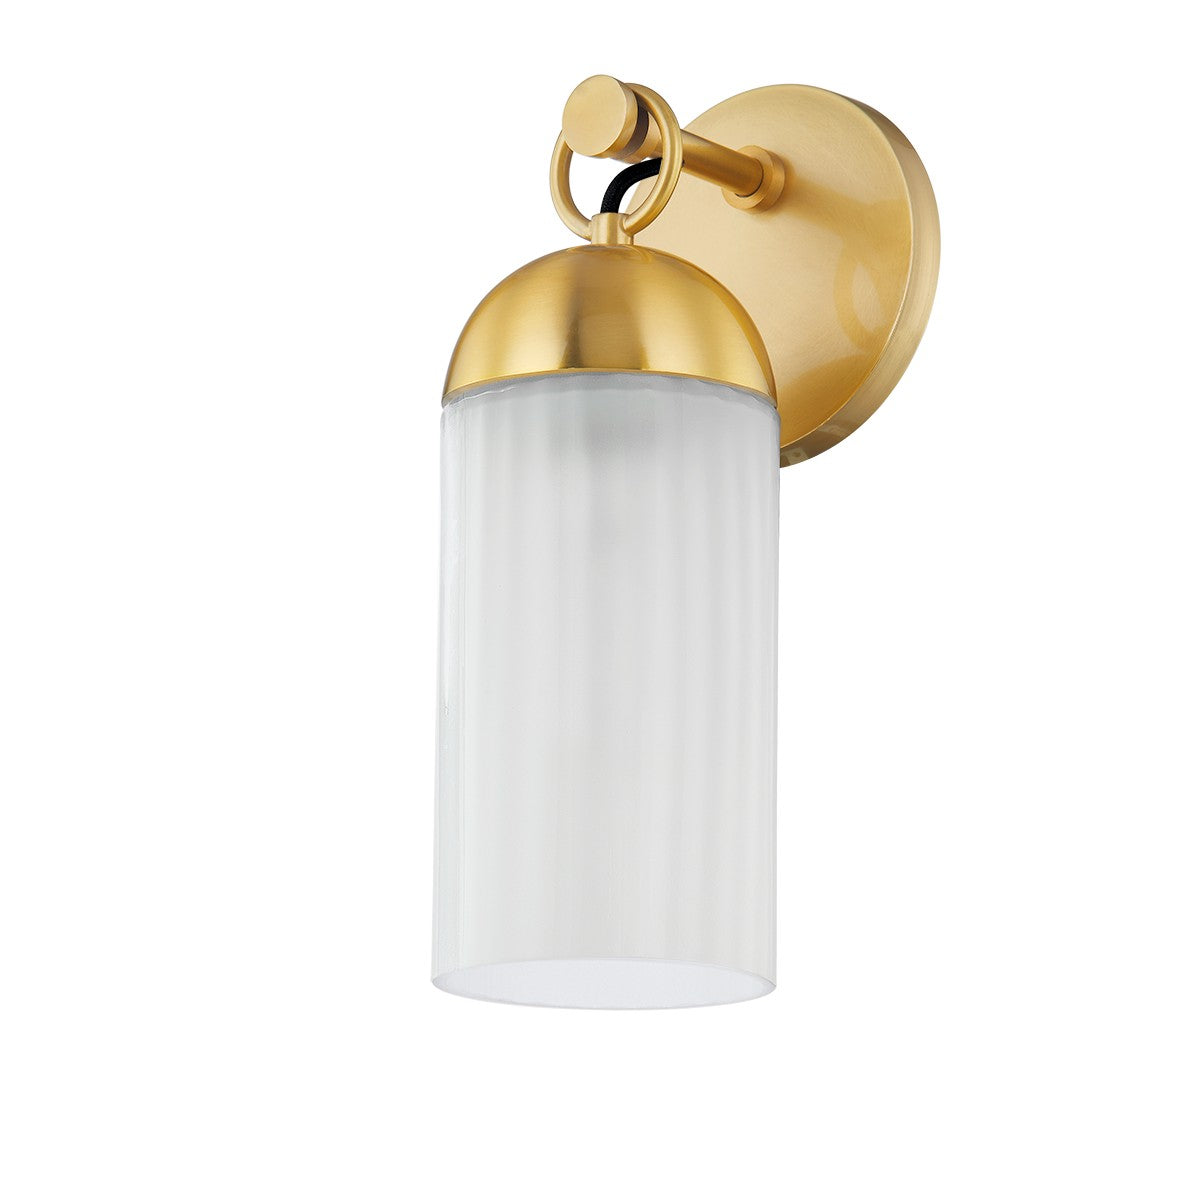 Mitzi - H796101-AGB - One Light Wall Sconce - Emory - Aged Brass